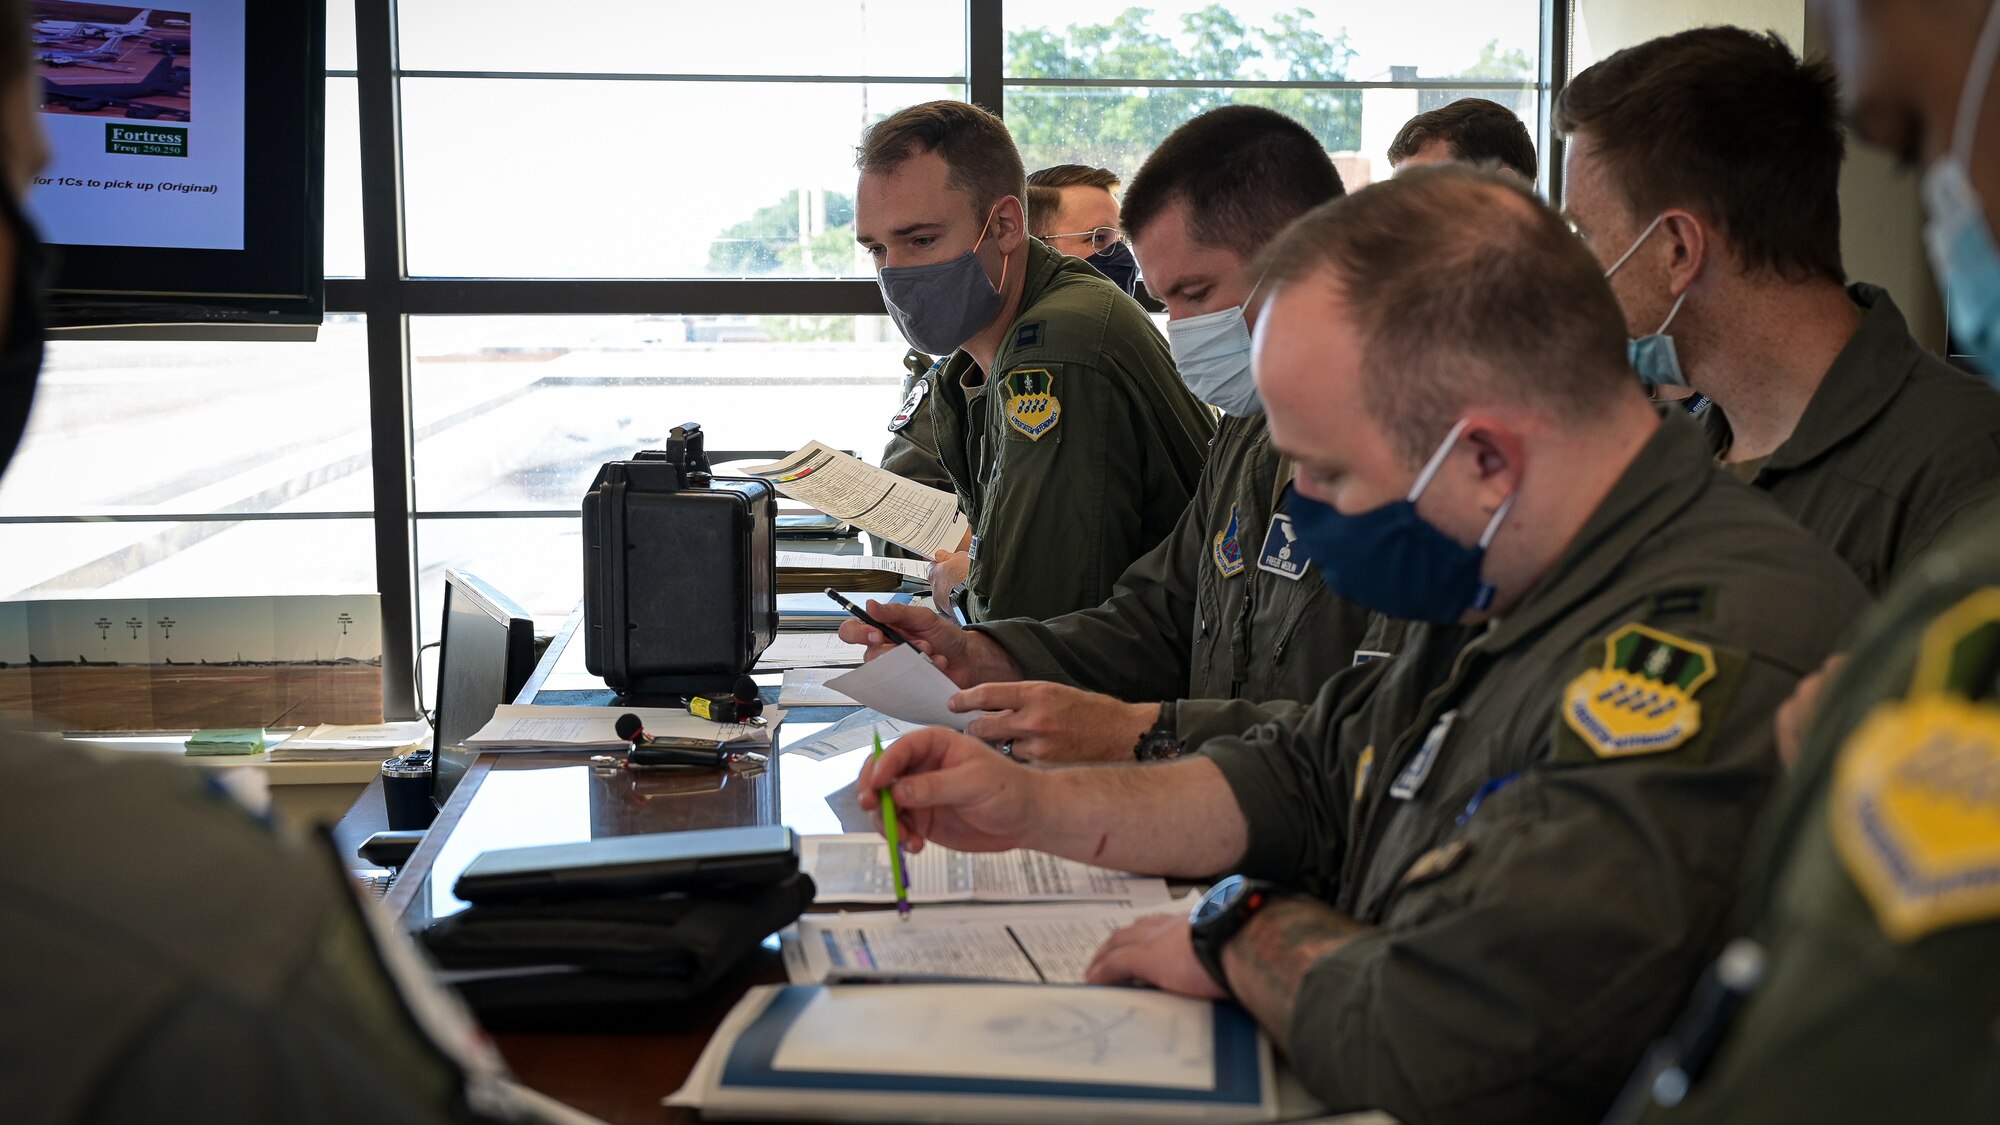 Aircrew from the 20th Bomb Squadron attend a pre-flight brief at the Integrated Operations Center in support RIMPAC 2022 at Barksdale Air Force Base, Aug. 1, 2022. Twenty-six nations, 38 ships, three submarines, more than 170 aircraft and 25,000 personnel are participating in RIMPAC from June 29 to Aug. 4 in and around the Hawaiian Islands and Southern California. The world’s largest international maritime exercise, RIMPAC provides a unique training opportunity while fostering and sustaining cooperative relationships among participants critical to ensuring the safety of sea lanes and security on the world’s oceans. RIMPAC 2022 is the 28th exercise in the series that began in 1971. (U.S. Air Force photo by Senior Airman Jonathan E. Ramos)